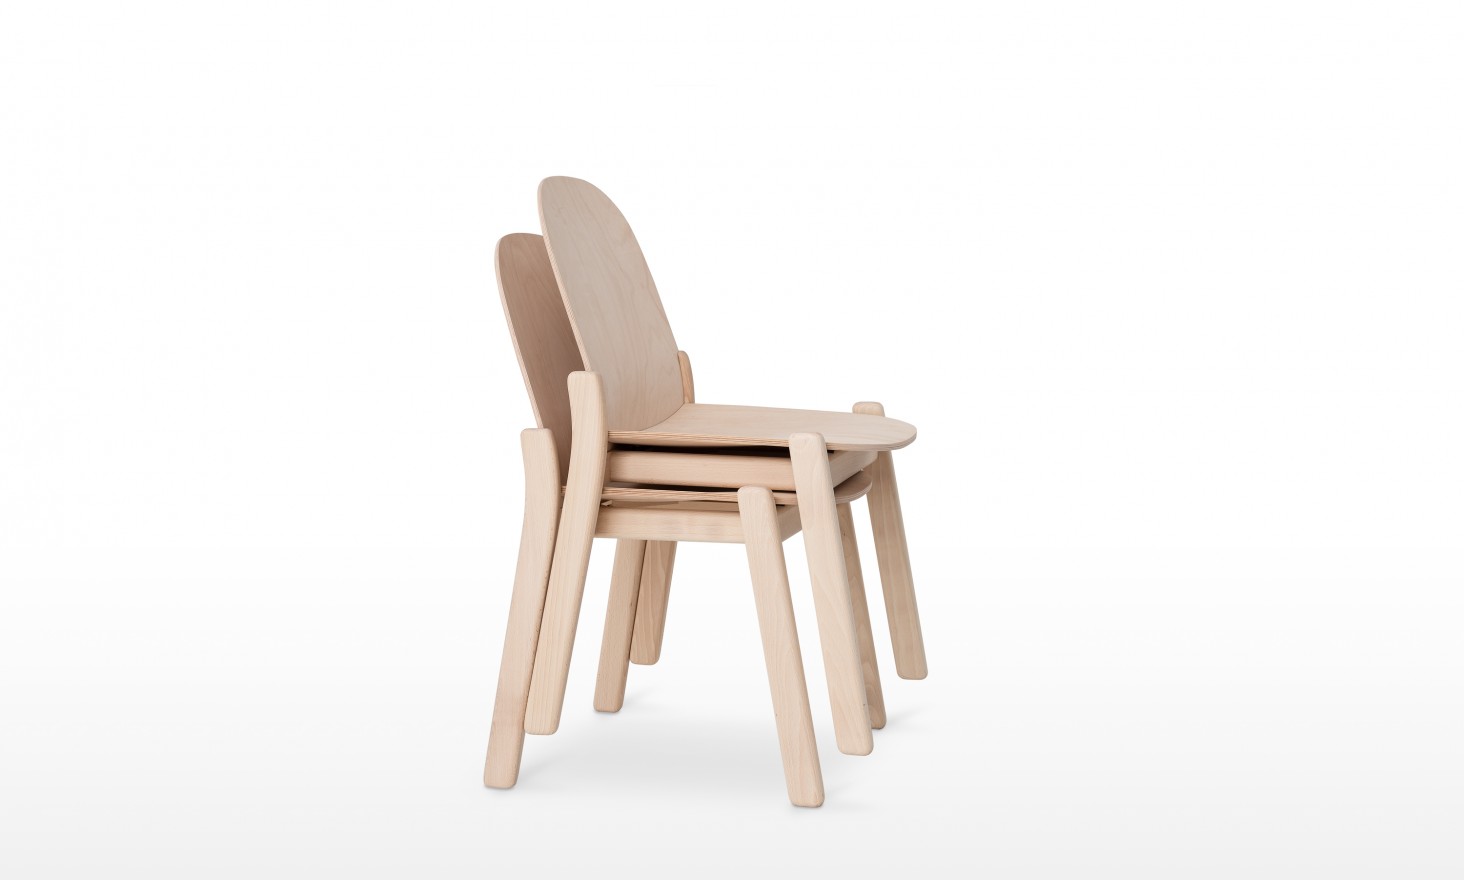 NORDIC wooden chairs